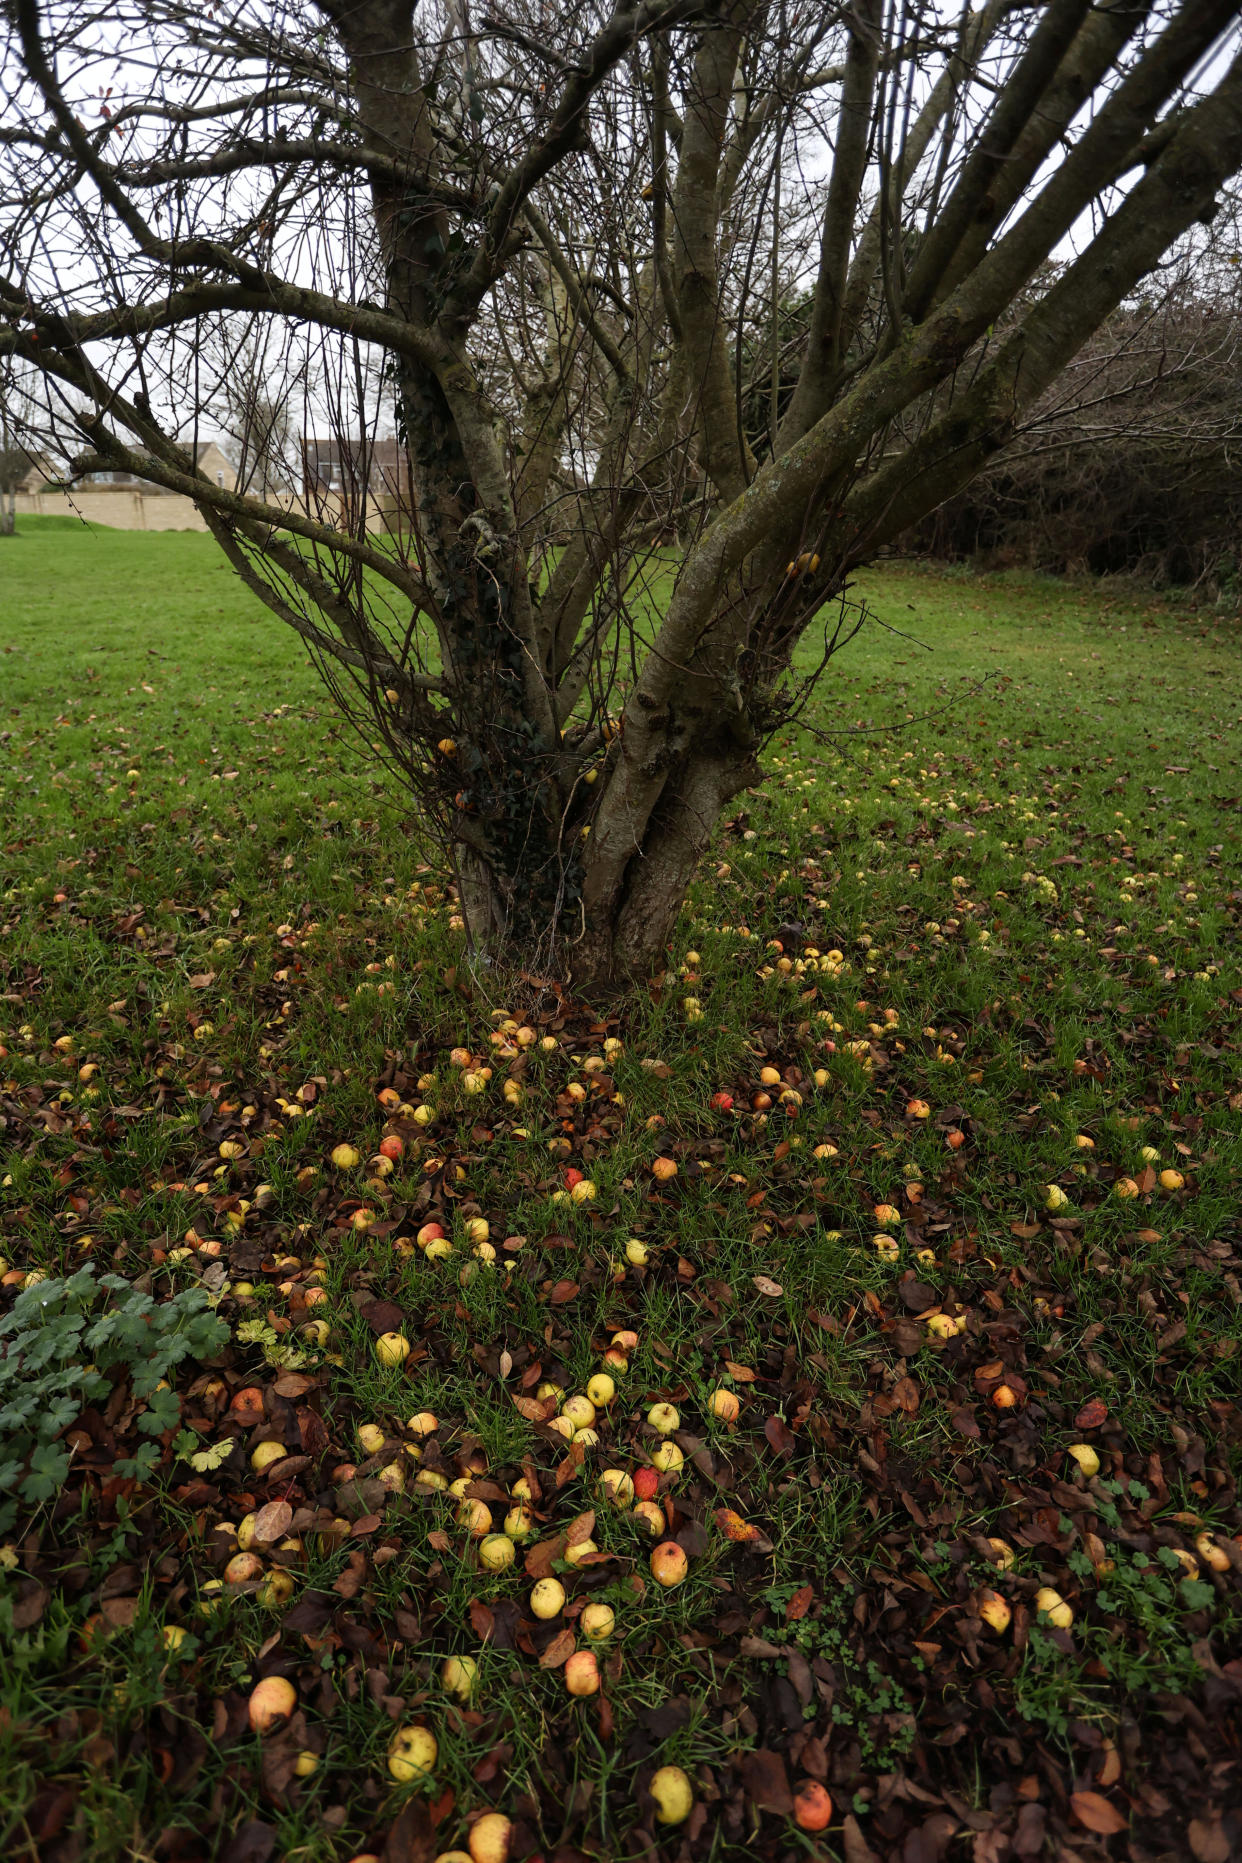 Westwood Parish Council want to cut down four of Westwood Parkâ€™s apple trees because the fruit which falls to the ground is a - ''tripping hazard''. Westwood, Wiltshire. 20 December 2021.  See SWNS story SWBRapples. Residents say a council has launched ''ludicrous'' plans to chop down four apple trees - because the fruit which falls to the ground is a - ''TRIPPING hazard''.  The large trees have sat in the heart of Westwood in Wiltshire for over 30 years and the apples are eaten by locals who also use them to make cider and jam. But four of the five trees have now been earmarked to be cut down after the fallen fruit was deemed a health and safety risk. Nearly 200 people have signed a petition against the proposals with organisers saying the trees face the chop because the fruit was deemed a tripping risk.  